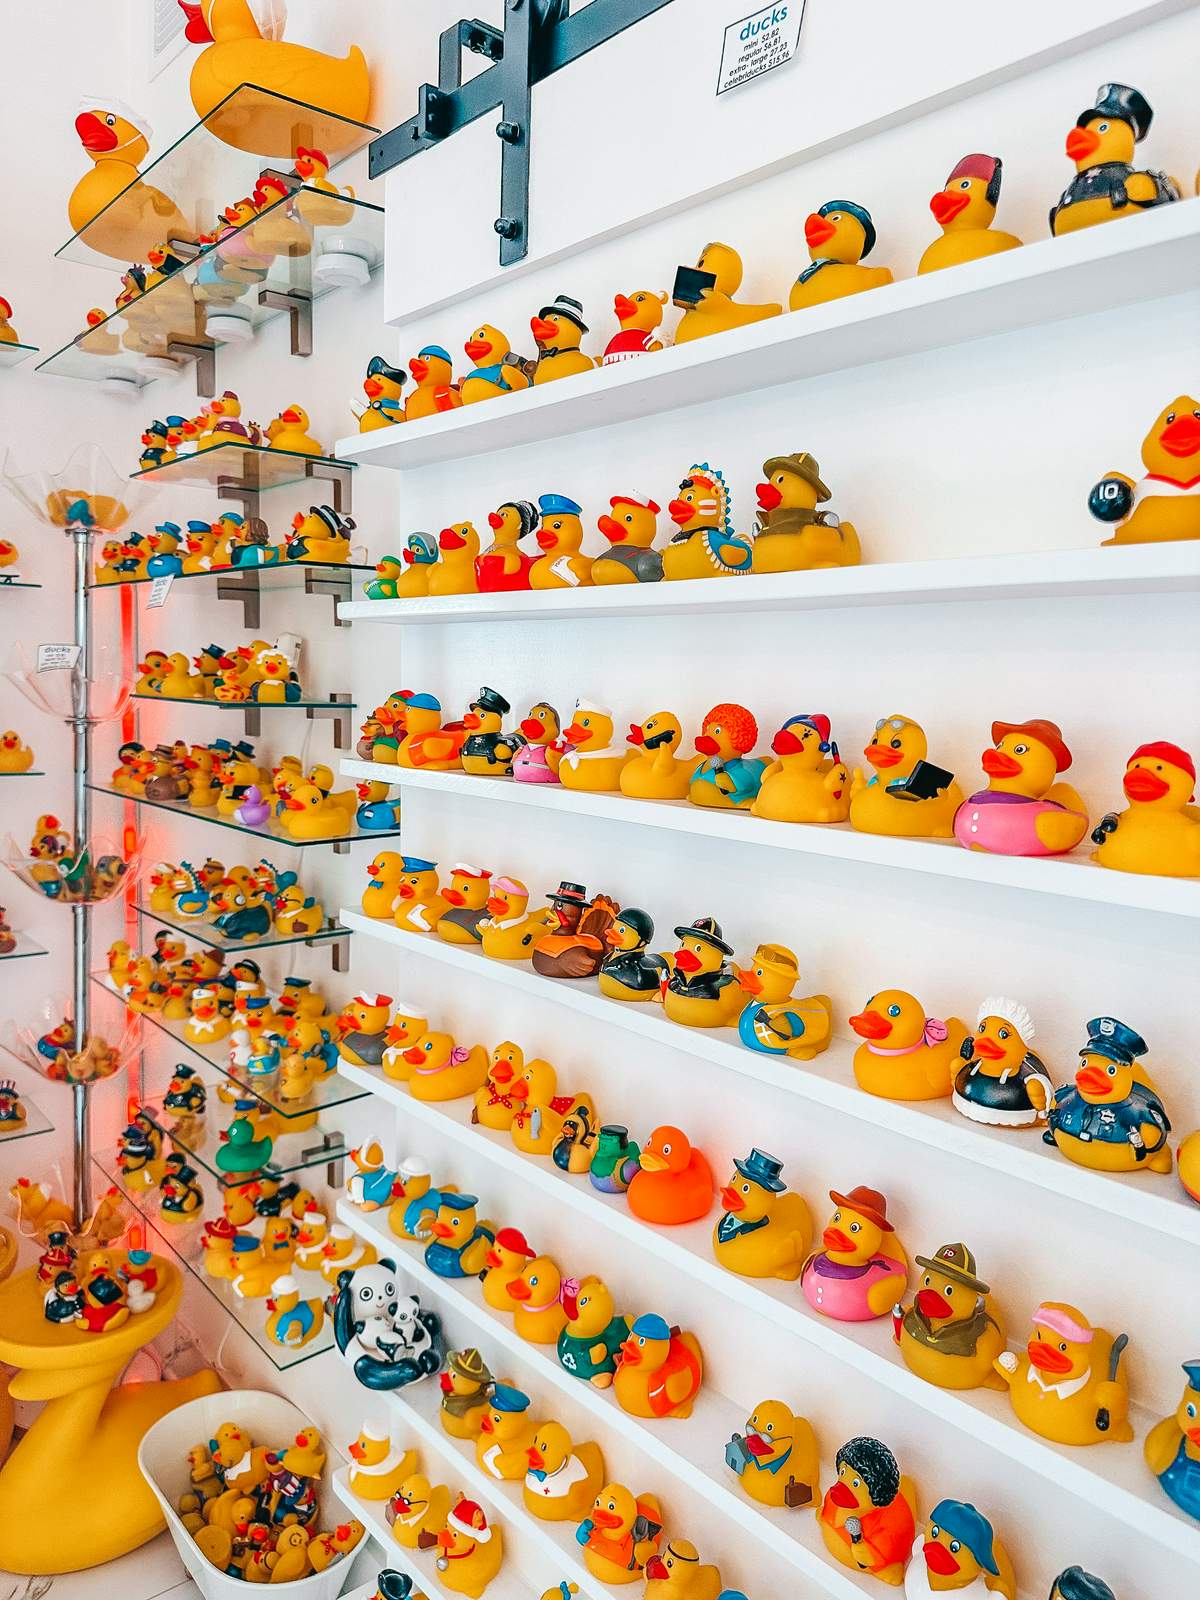 Rubber ducky collection at the Tipsy Duck bar